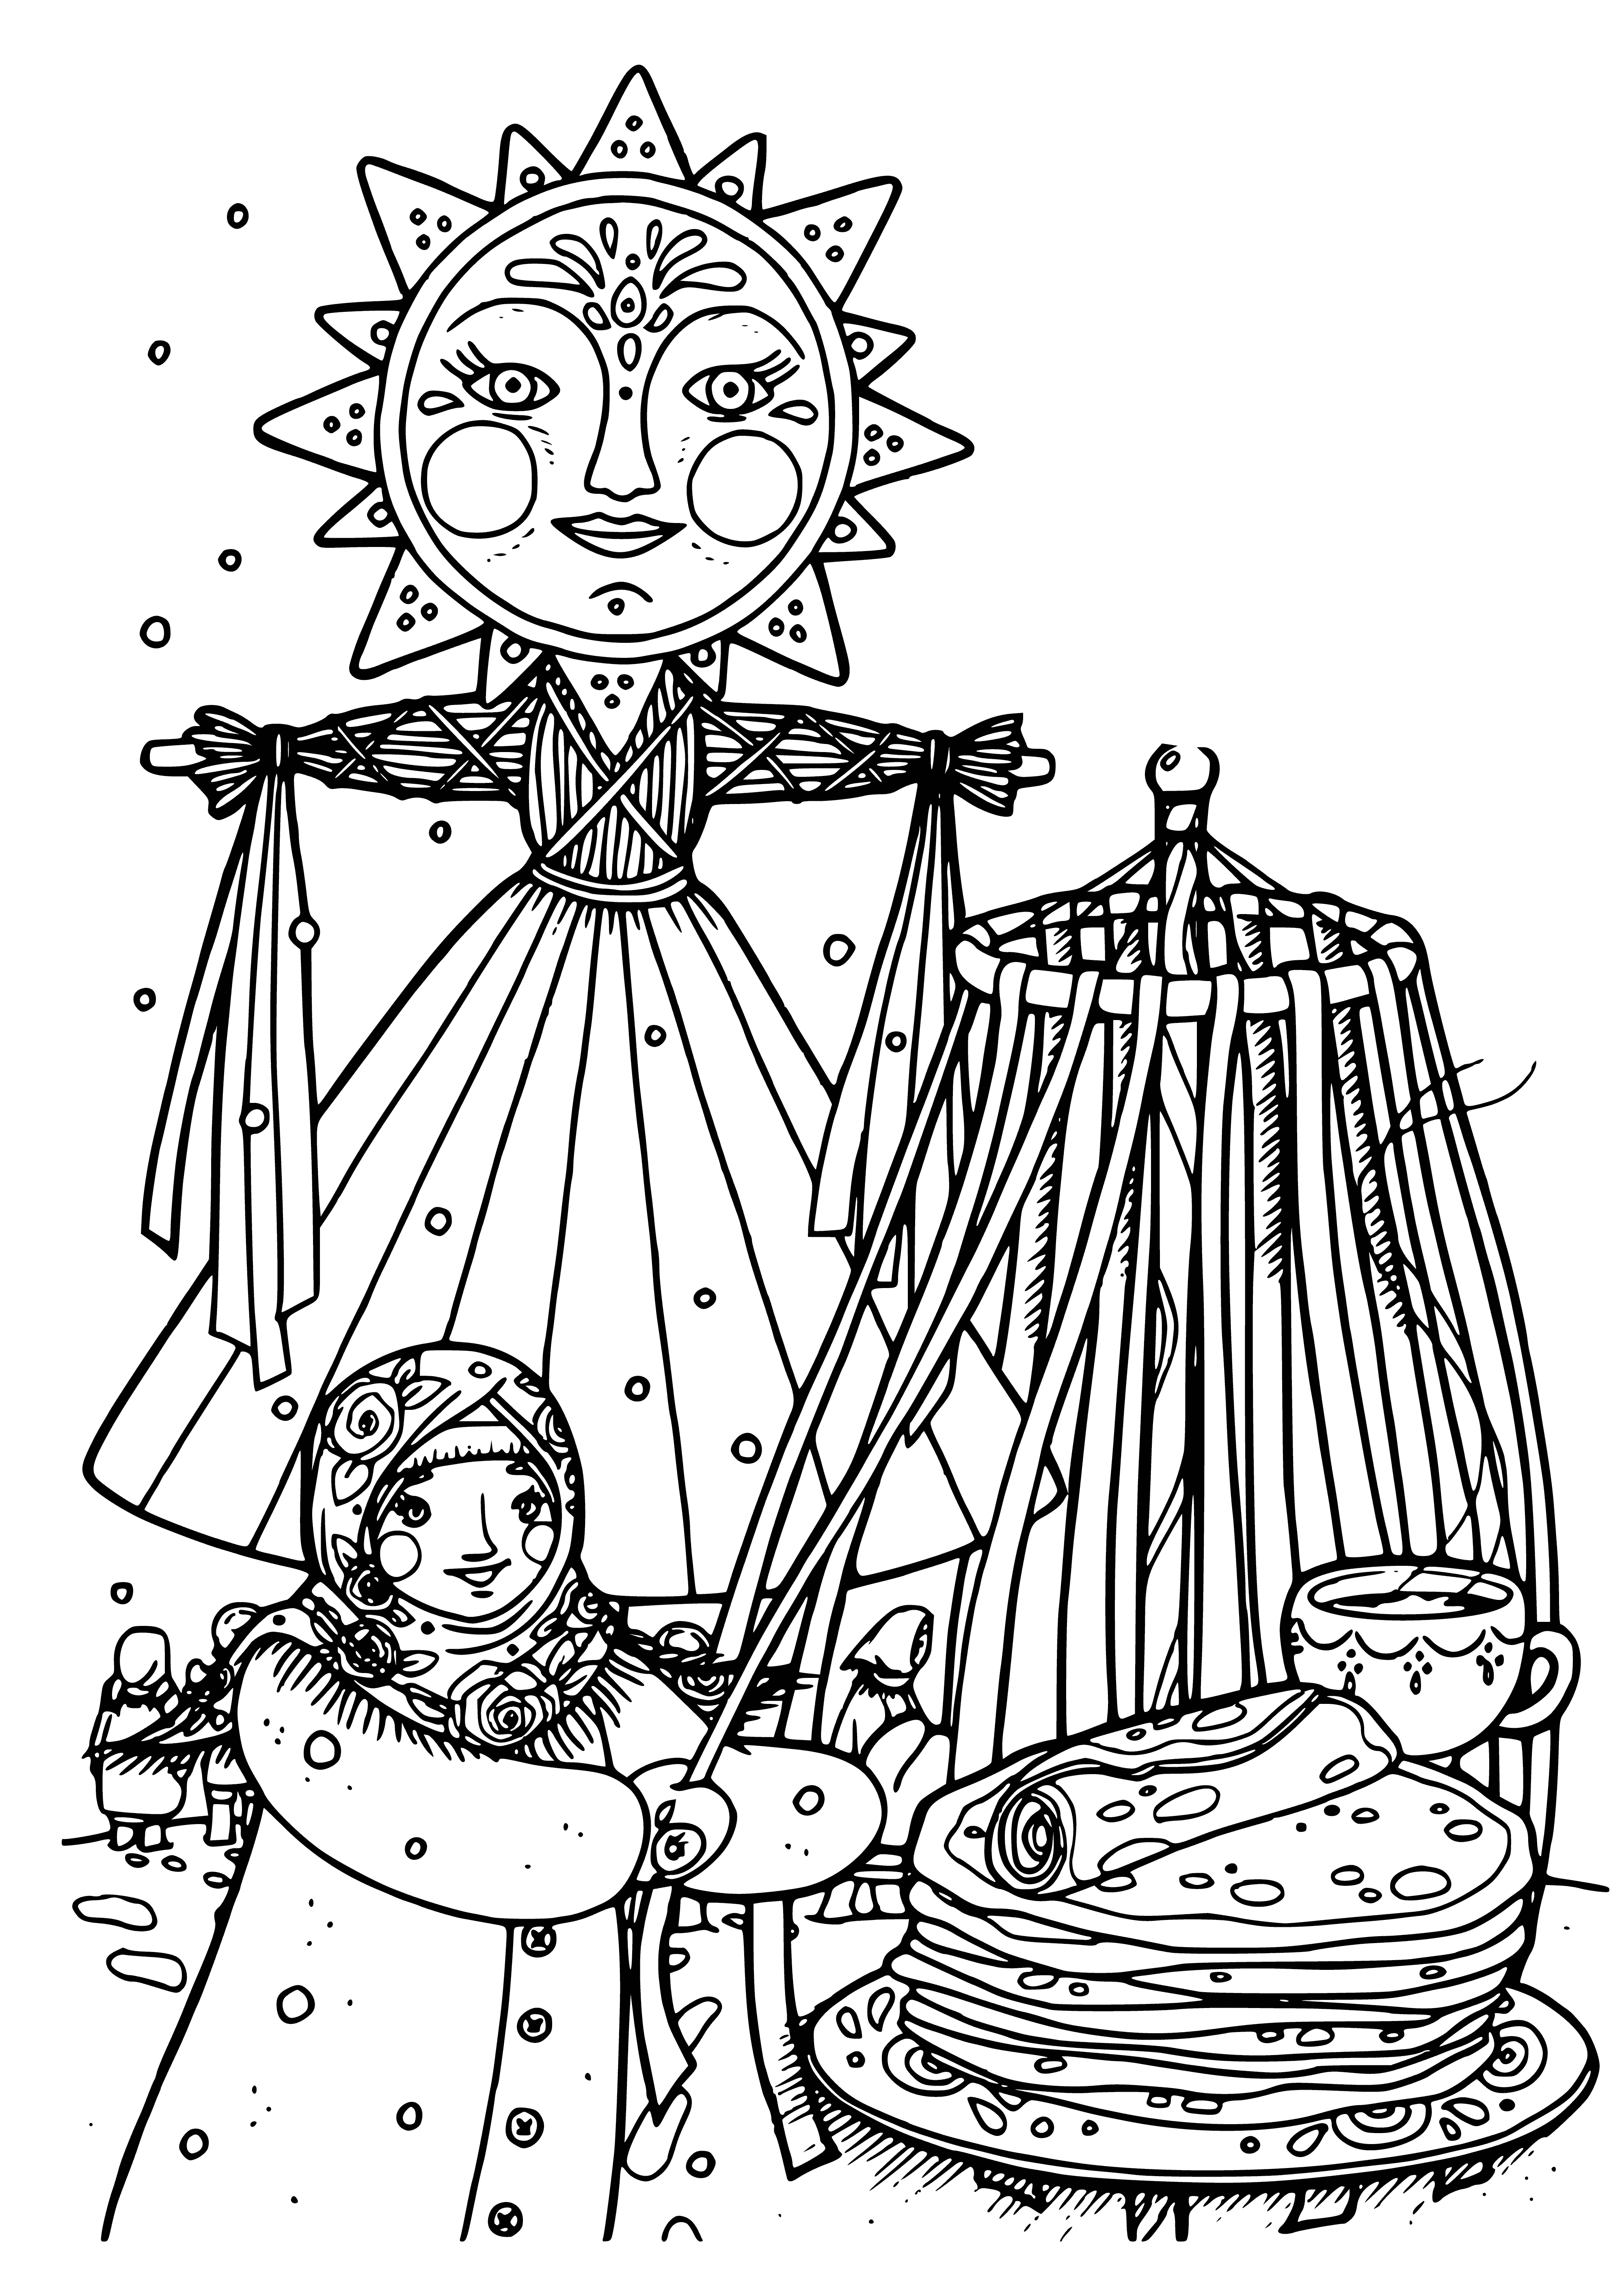 coloring page: Celebrate by eating pancakes & playing games during the Pancake Week festivities! Shrovetide marches include a large crowd & a giant frying pan w/ a pancake.